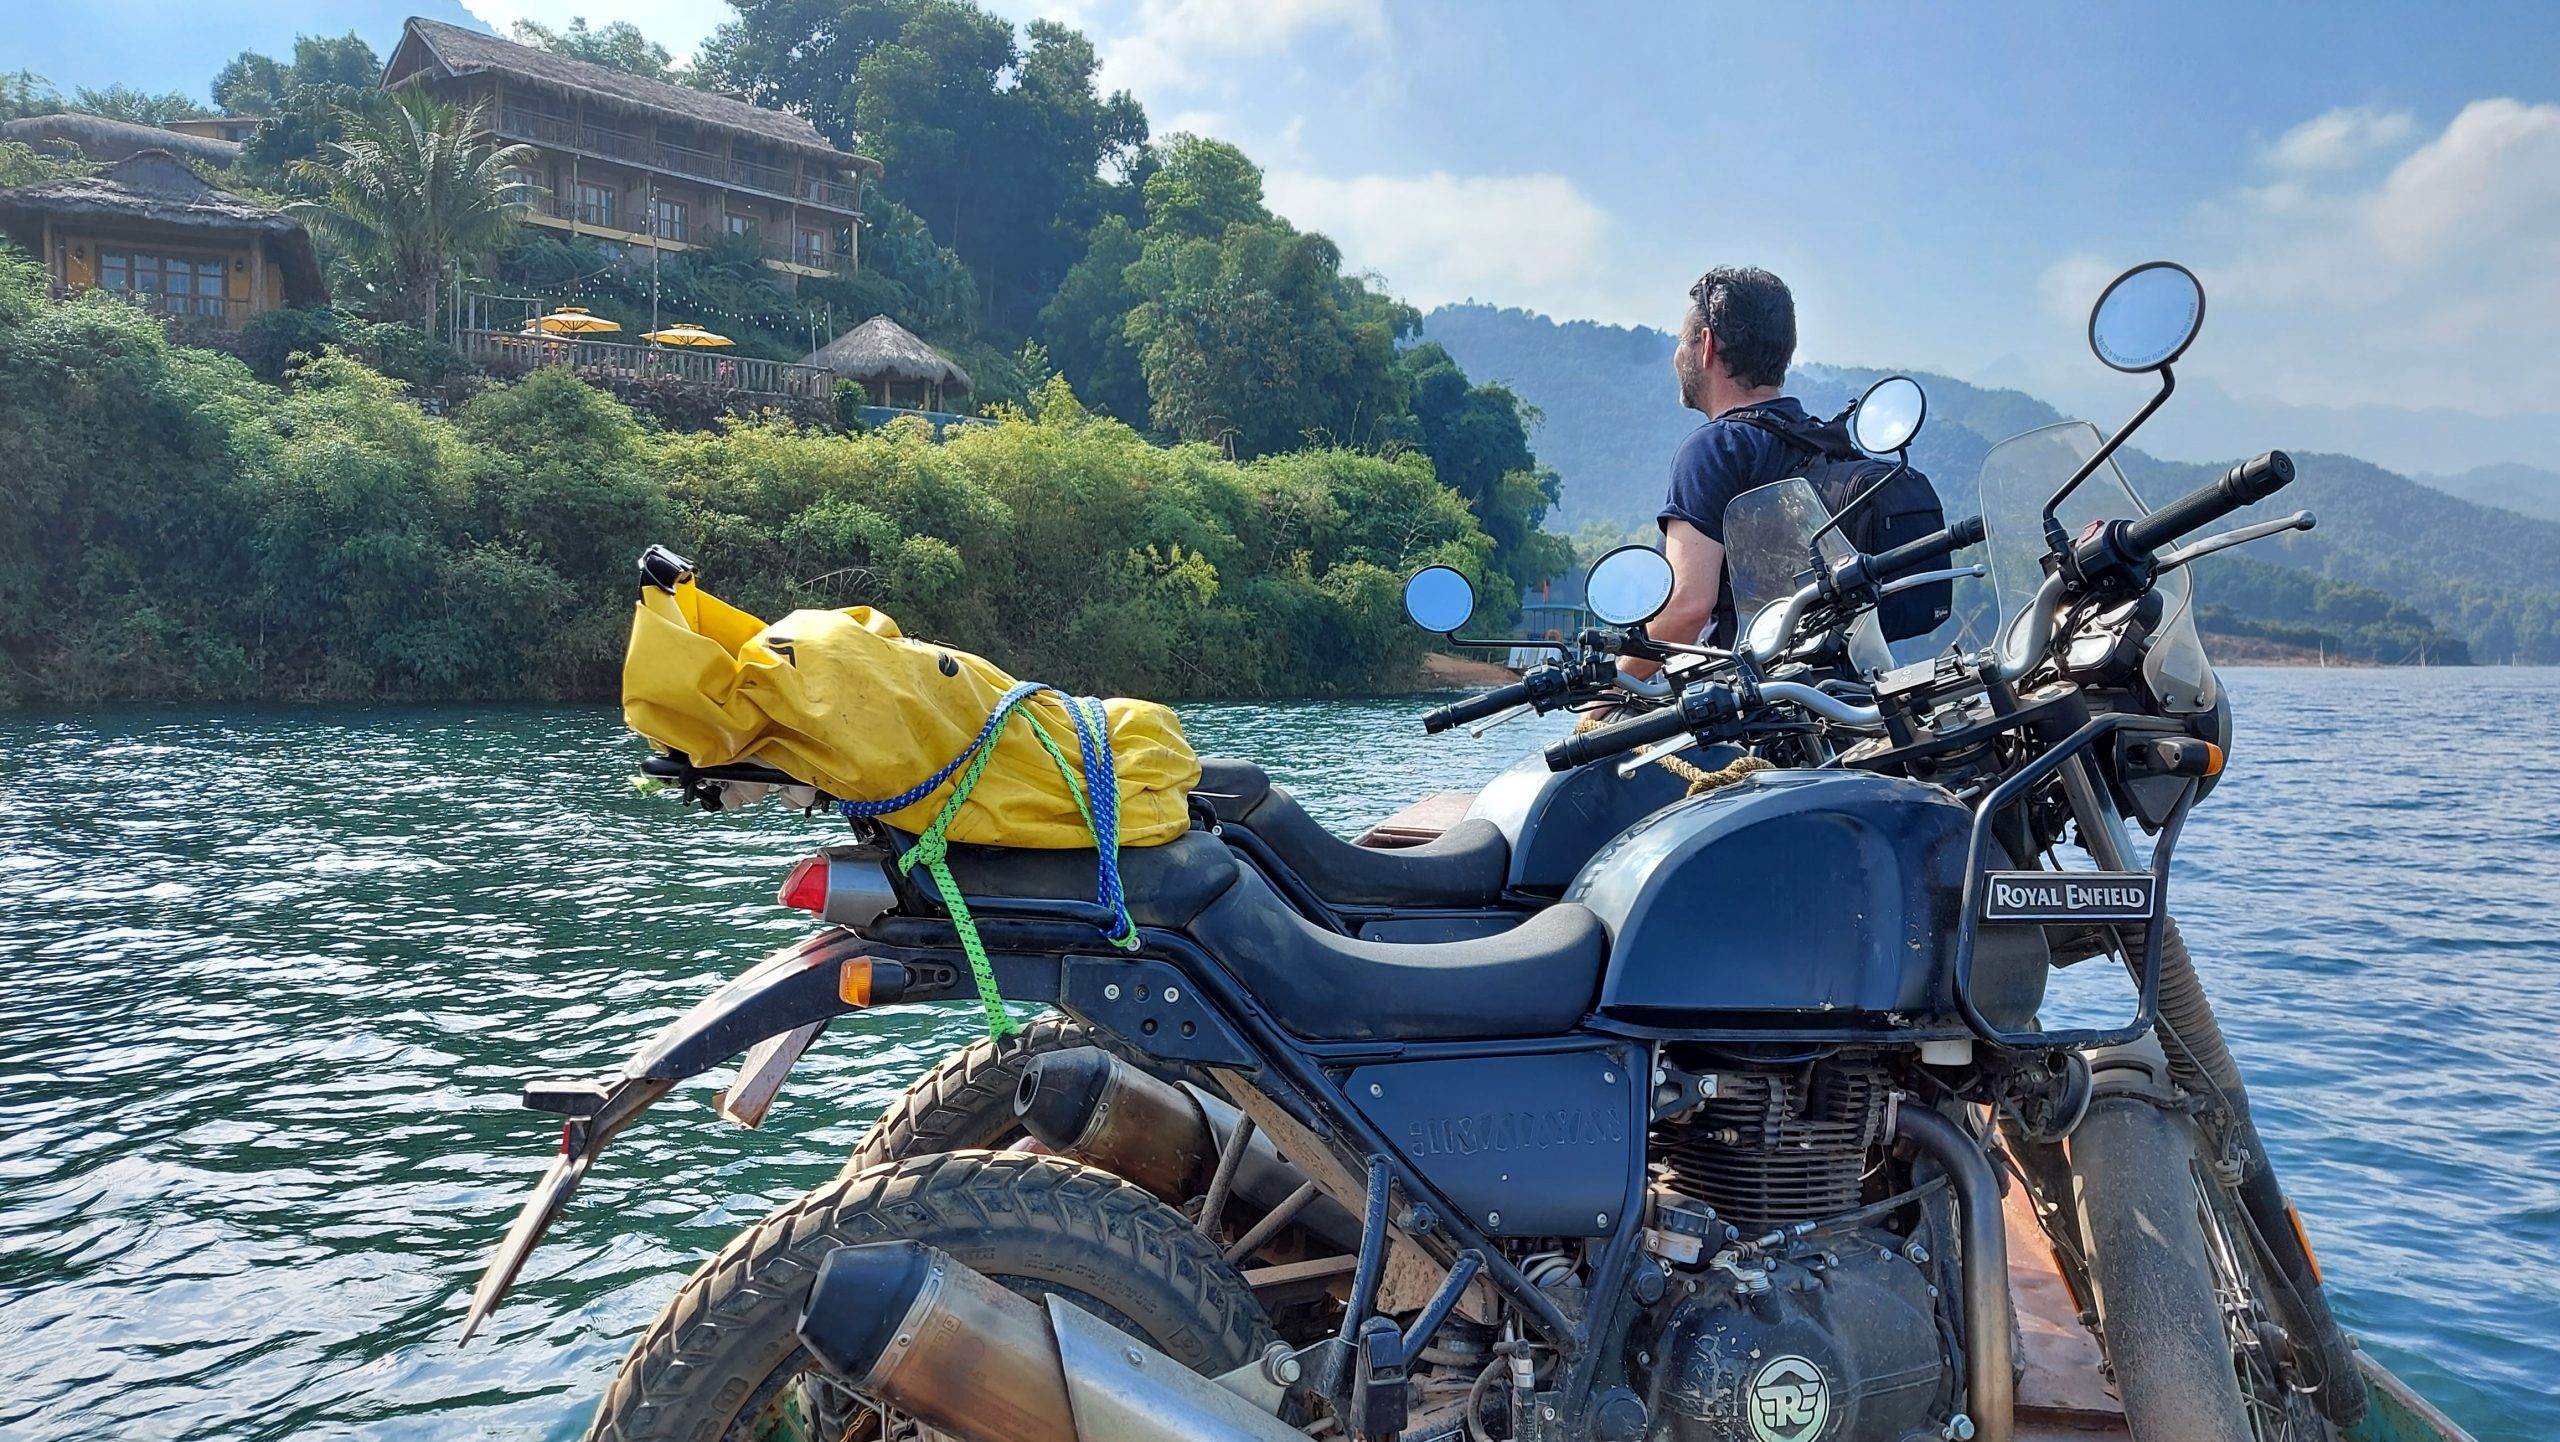 Digby from Explore Indochina taking his Himalayan across the water